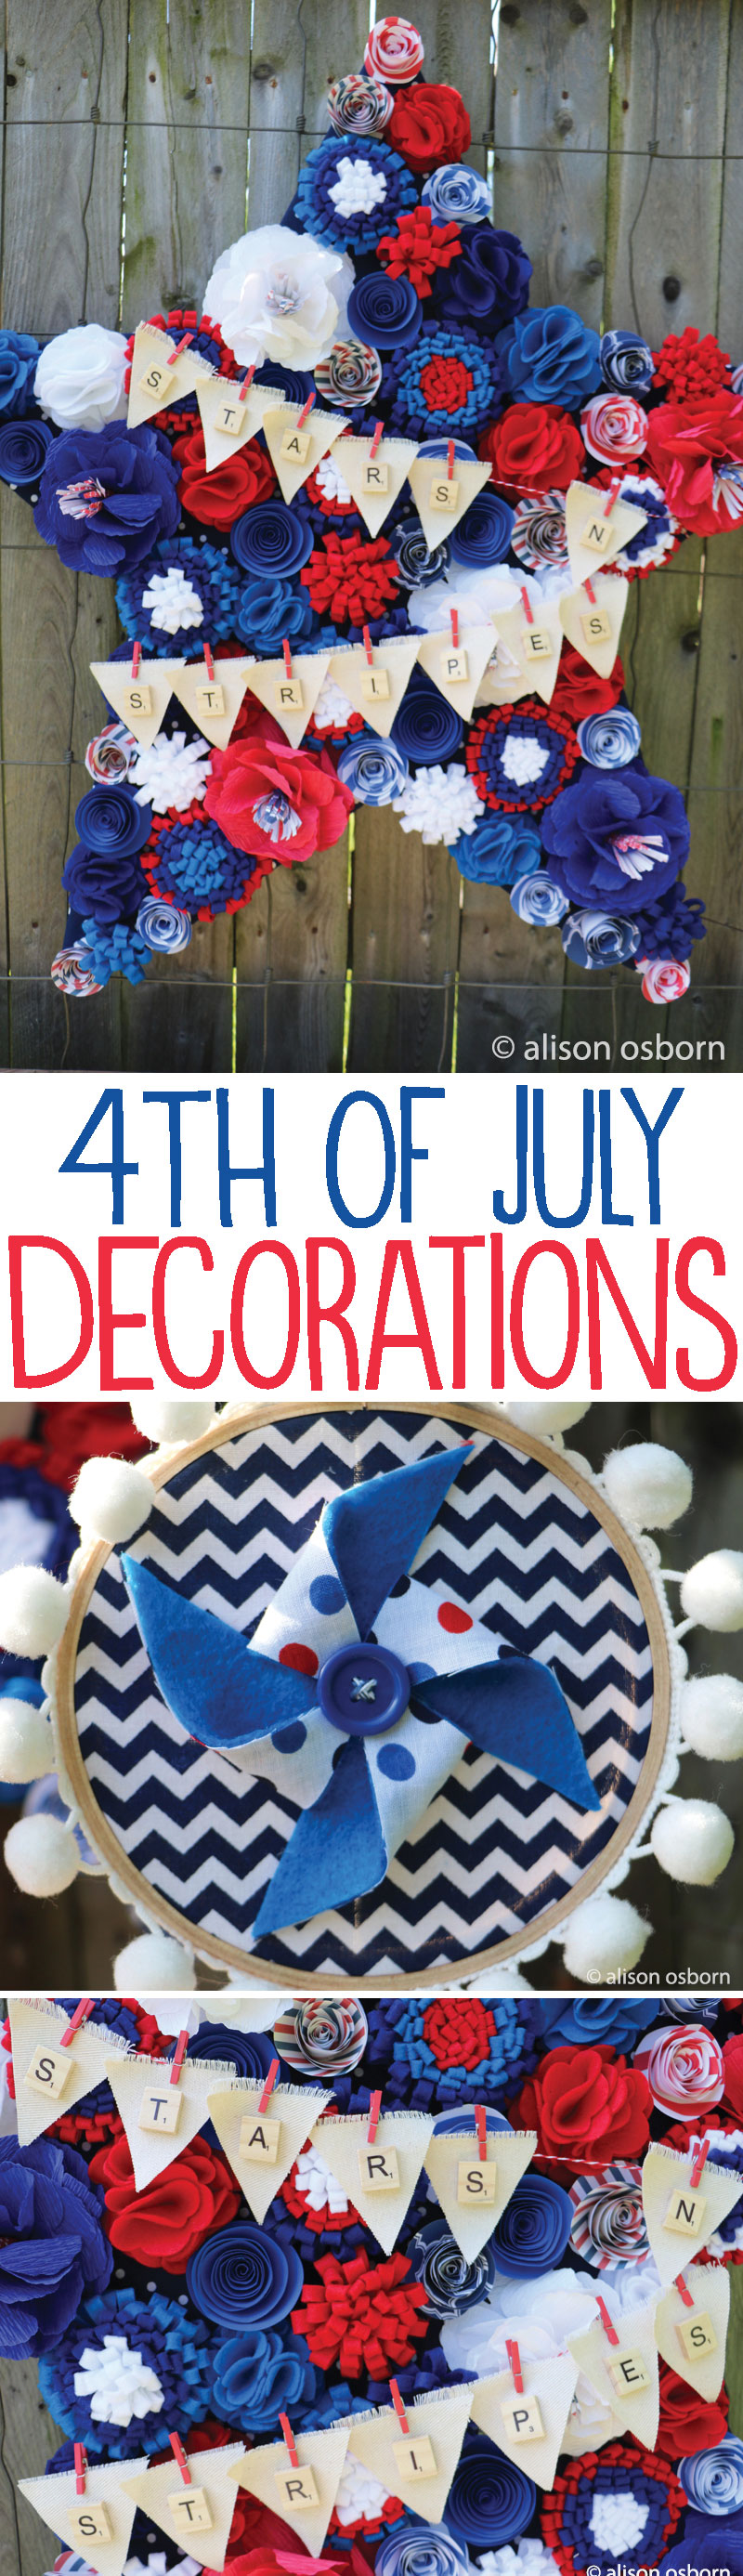 DIY-4th-Of-July-Decorations P4